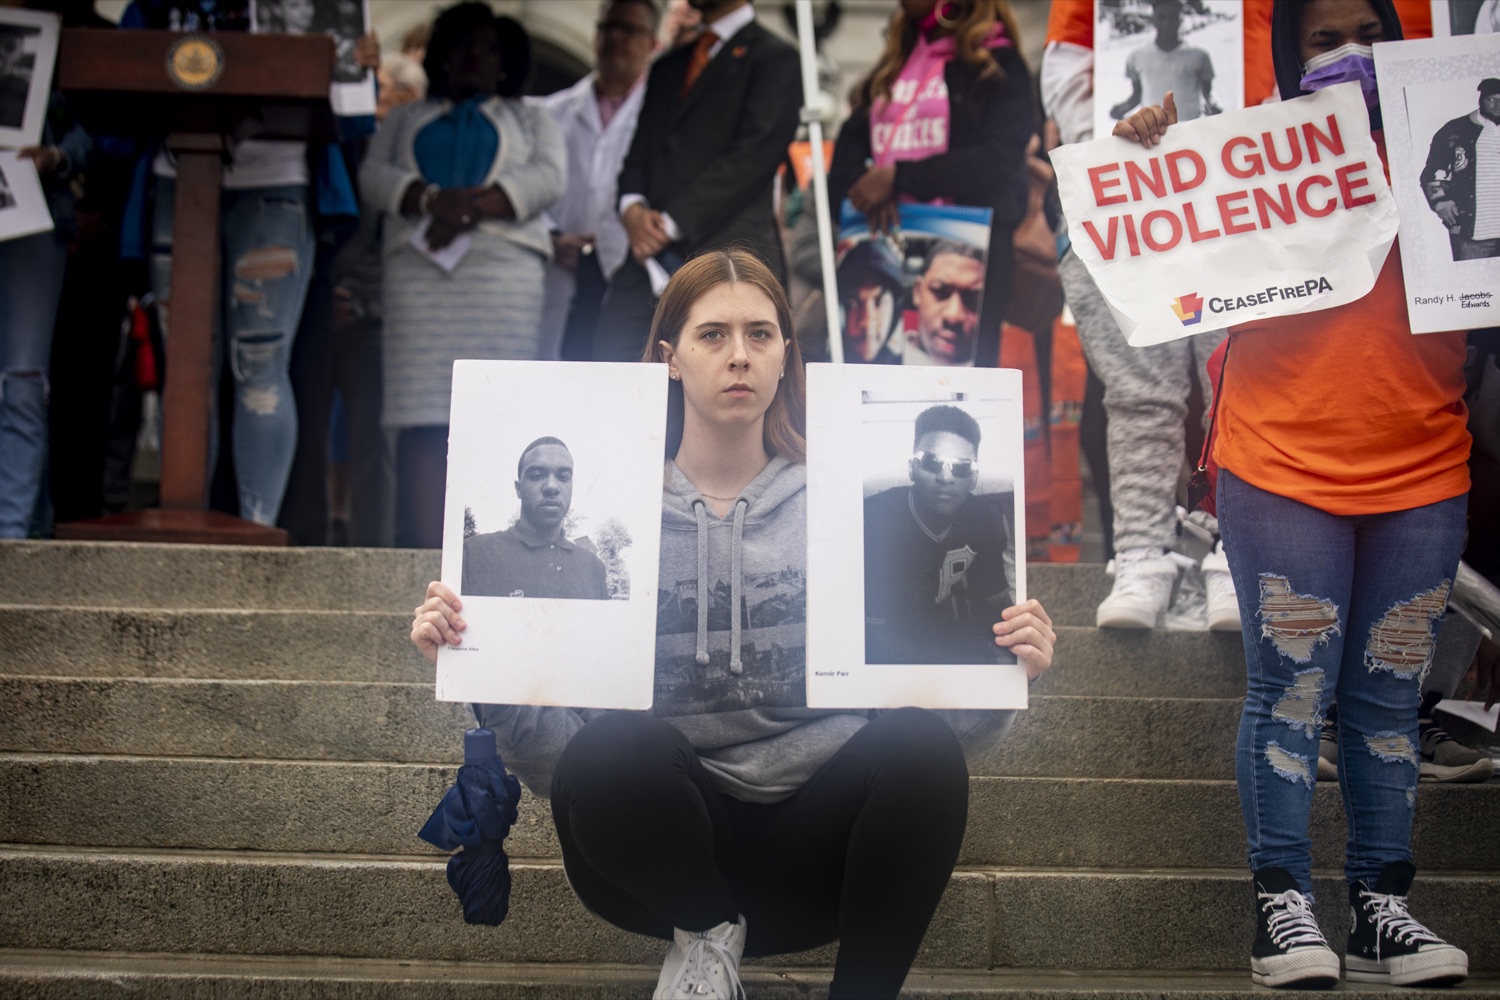 More than 200 Pennsylvanians at the Capitol call for legislative action to save lives against gun violence, in Harrisburg, PA on April 26, 2022.<br><a href="https://filesource.amperwave.net/commonwealthofpa/photo/20782_gov_ceaseFirePA_26.JPG" target="_blank">⇣ Download Photo</a>